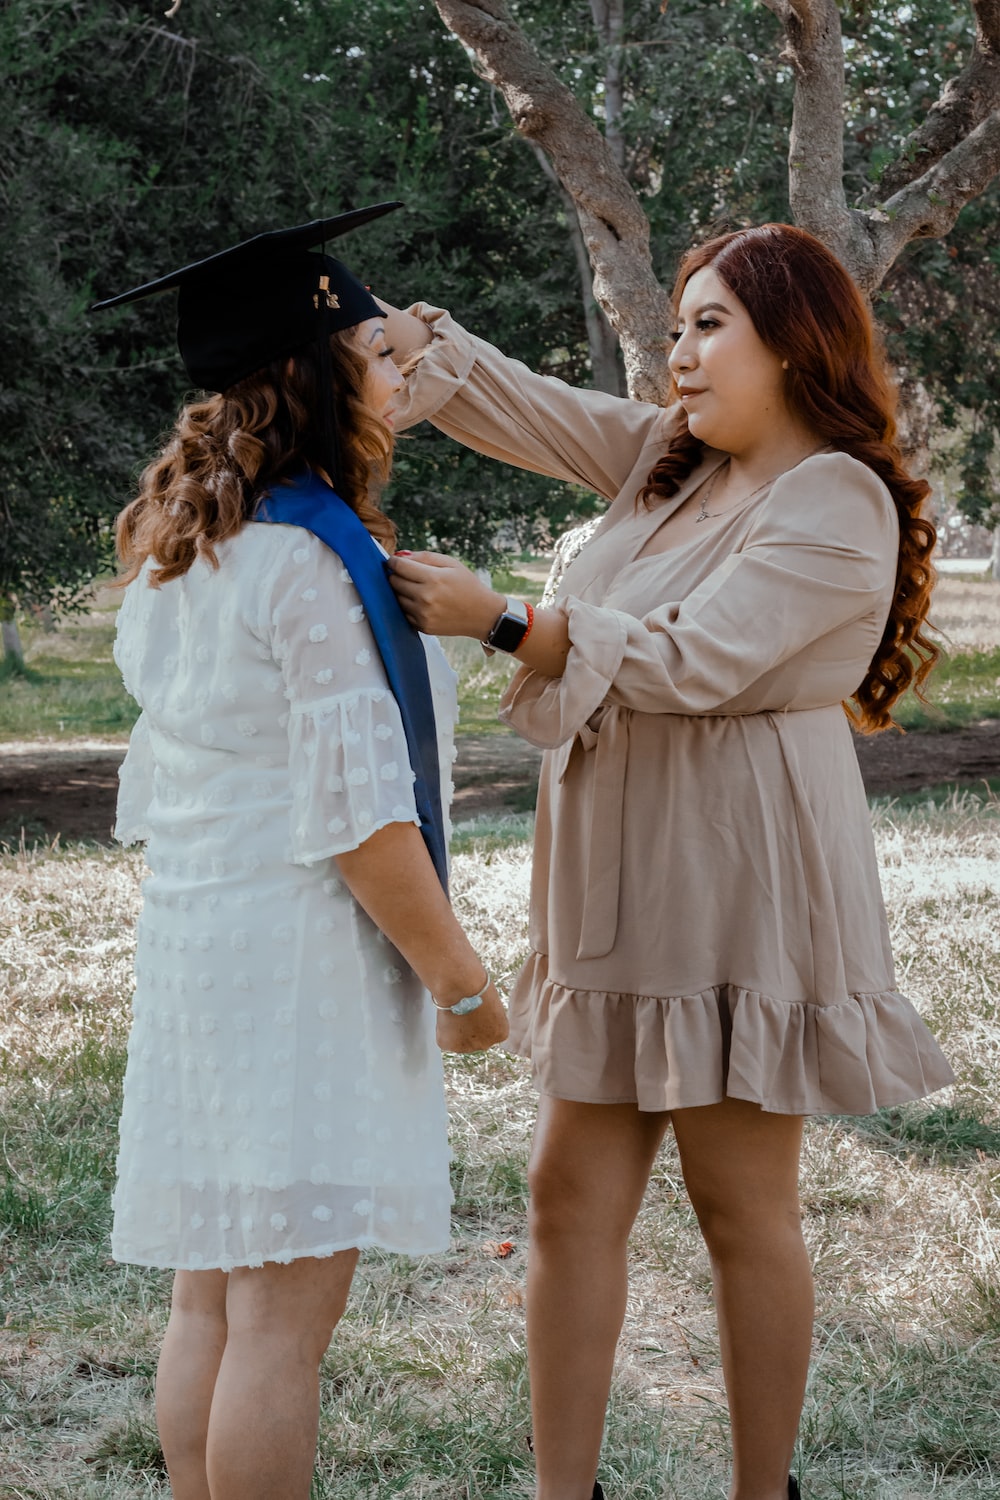 a person in a graduation gown and a person in a dress